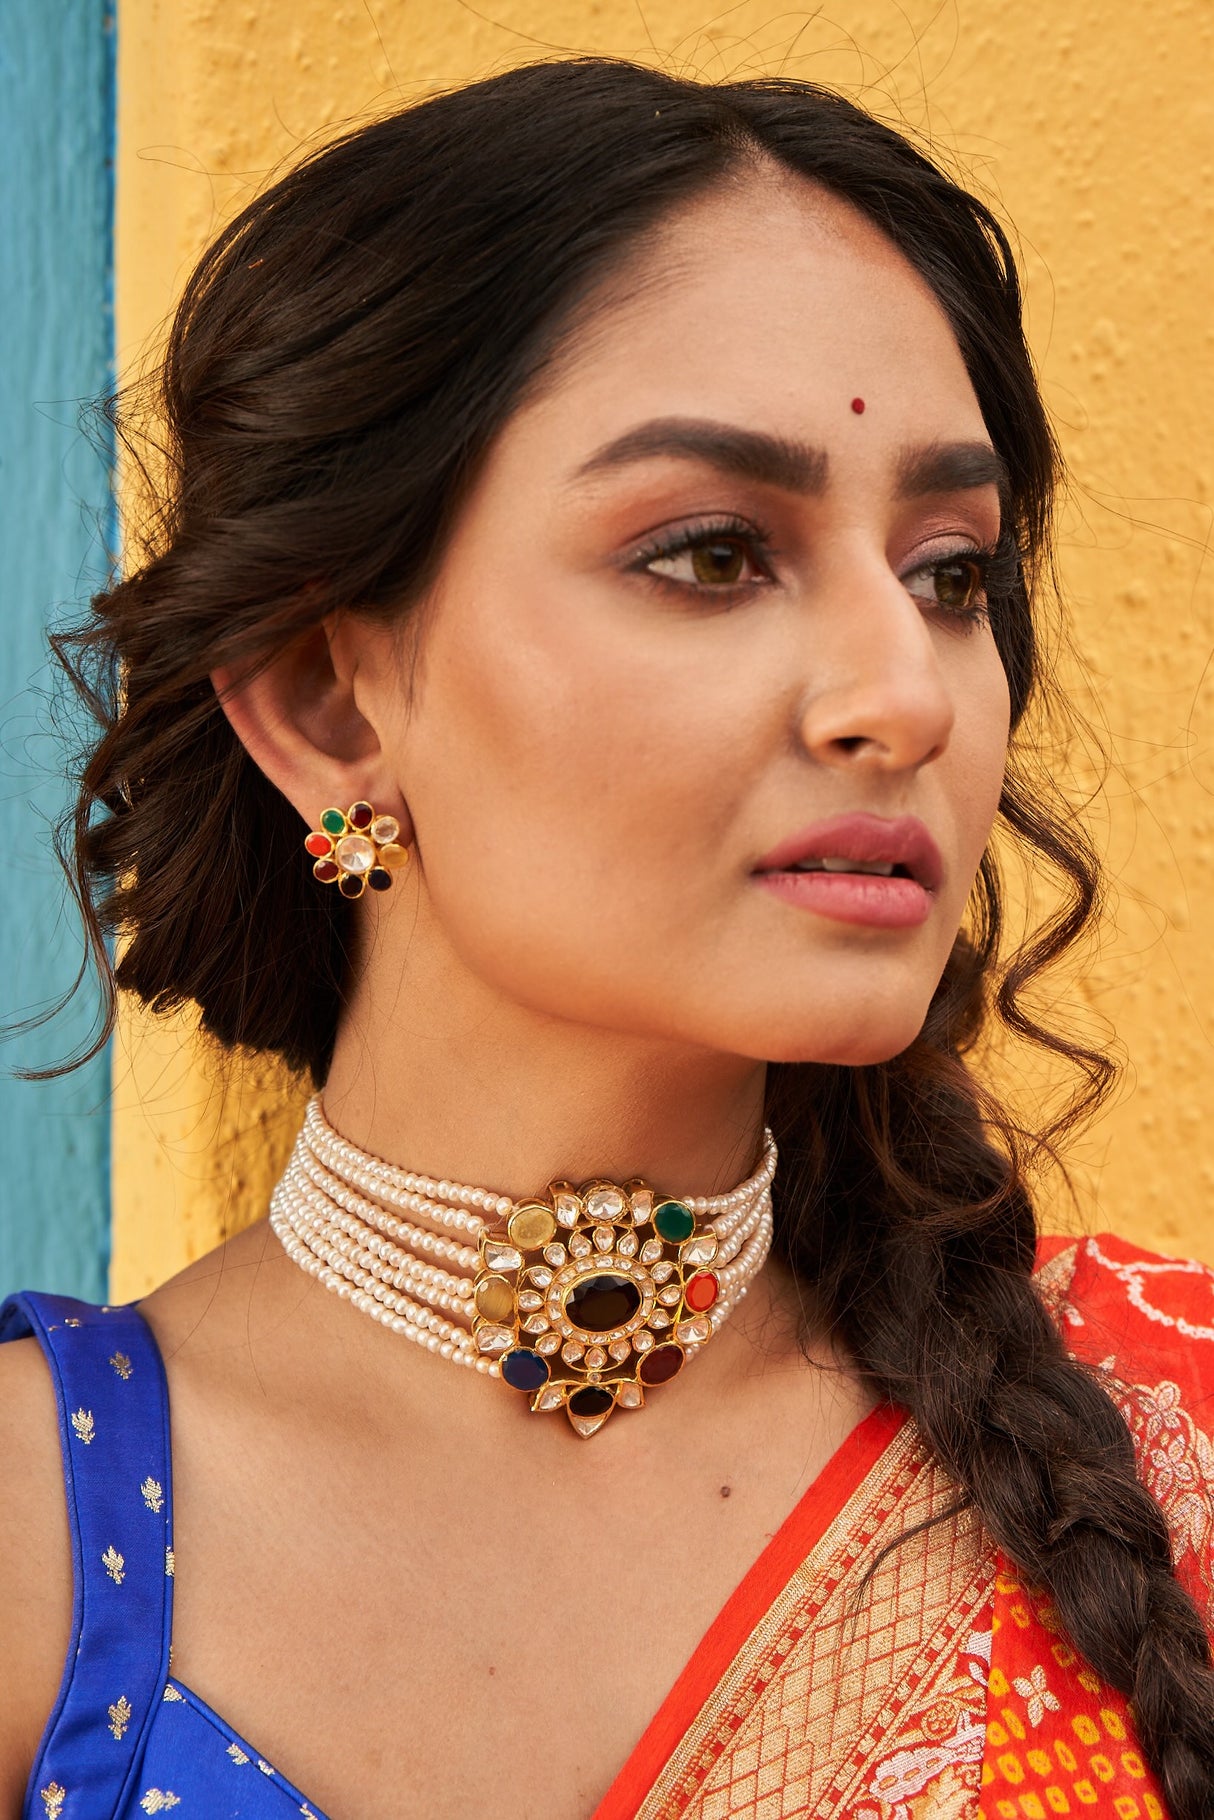 Handcrafted 92.5 Silver Navratna Choker with Earrings